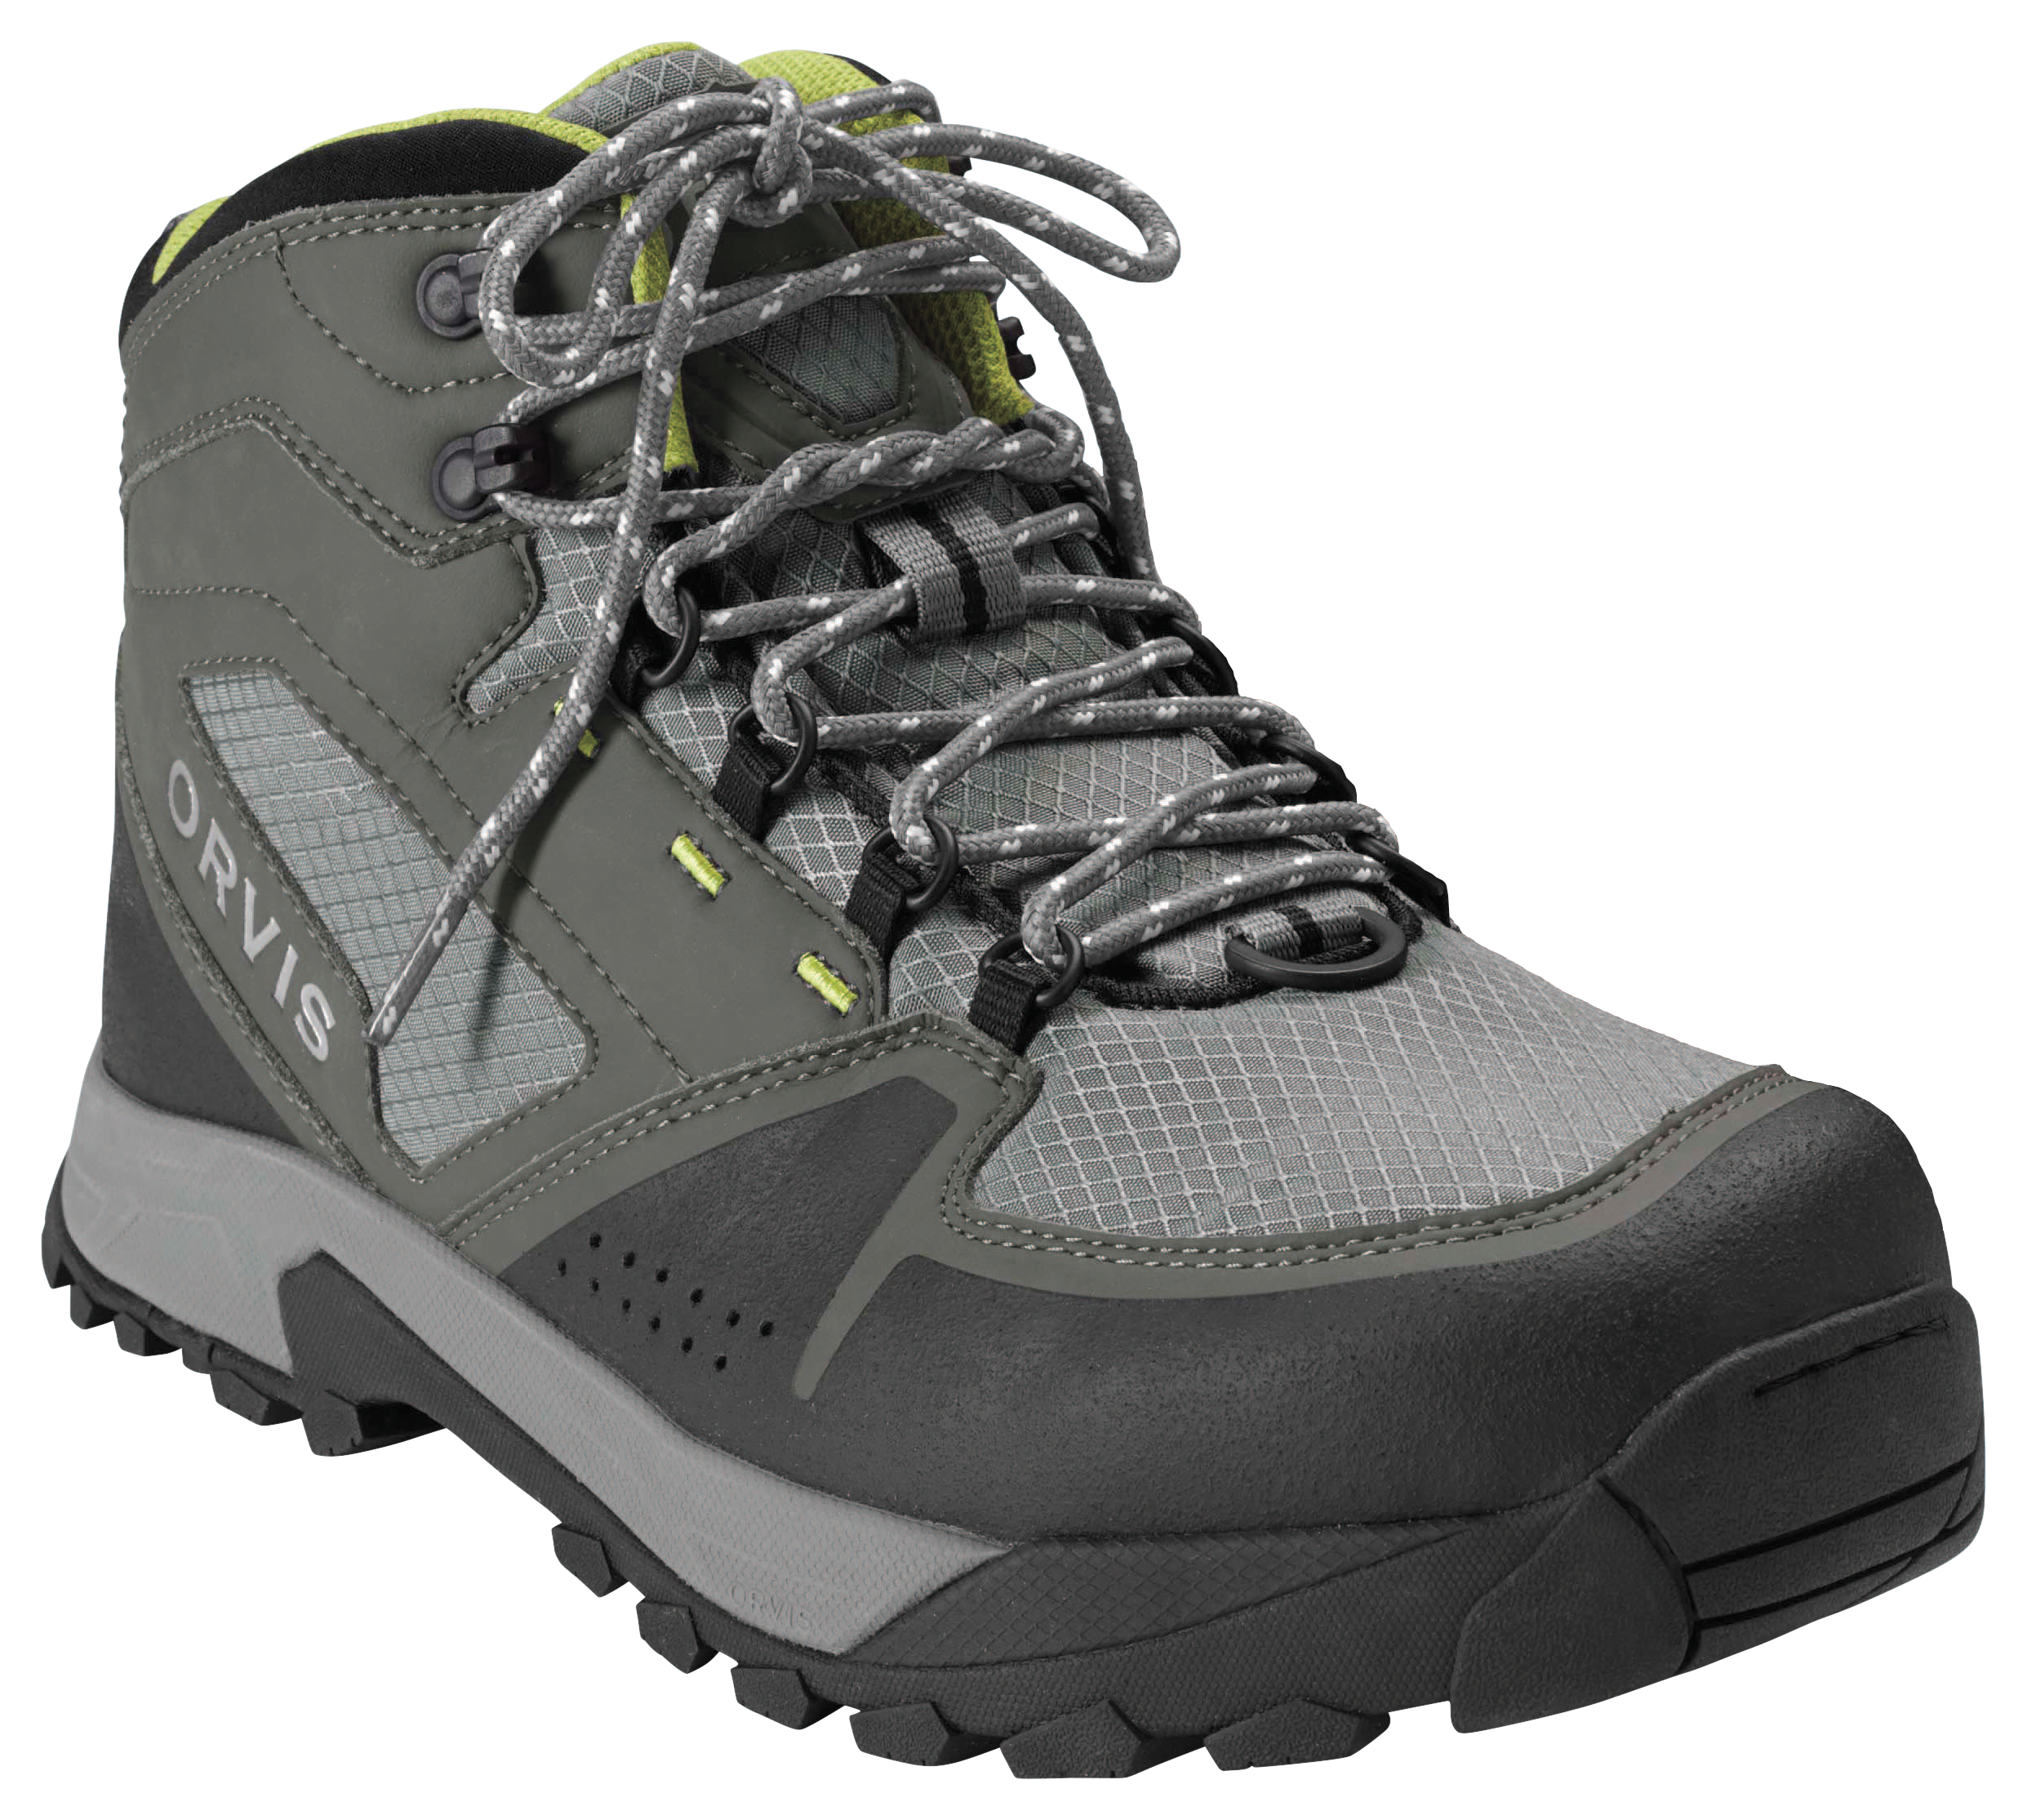 ORVIS Ultralight Wading Men's Fishing Boots NA (Size: 10)